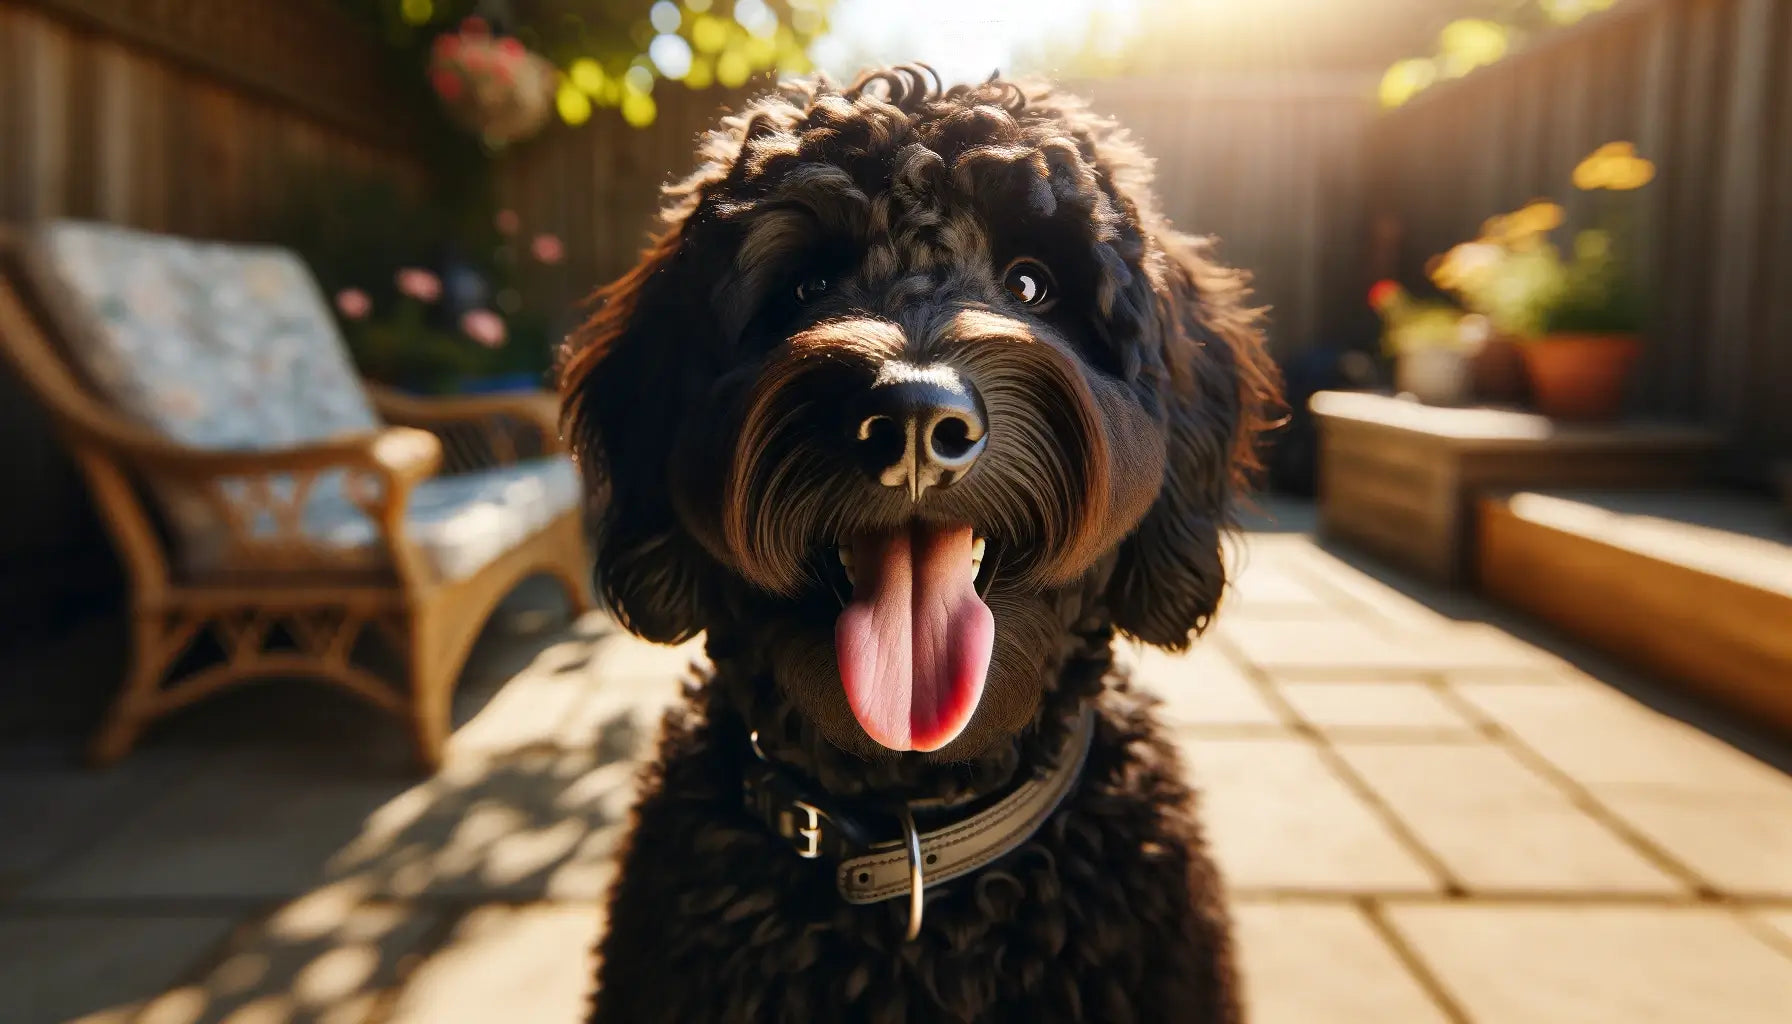 Black Goldendoodle sitting outside with a black collar, displaying its thick curly coat and a tongue-out smile in a sunny setting.